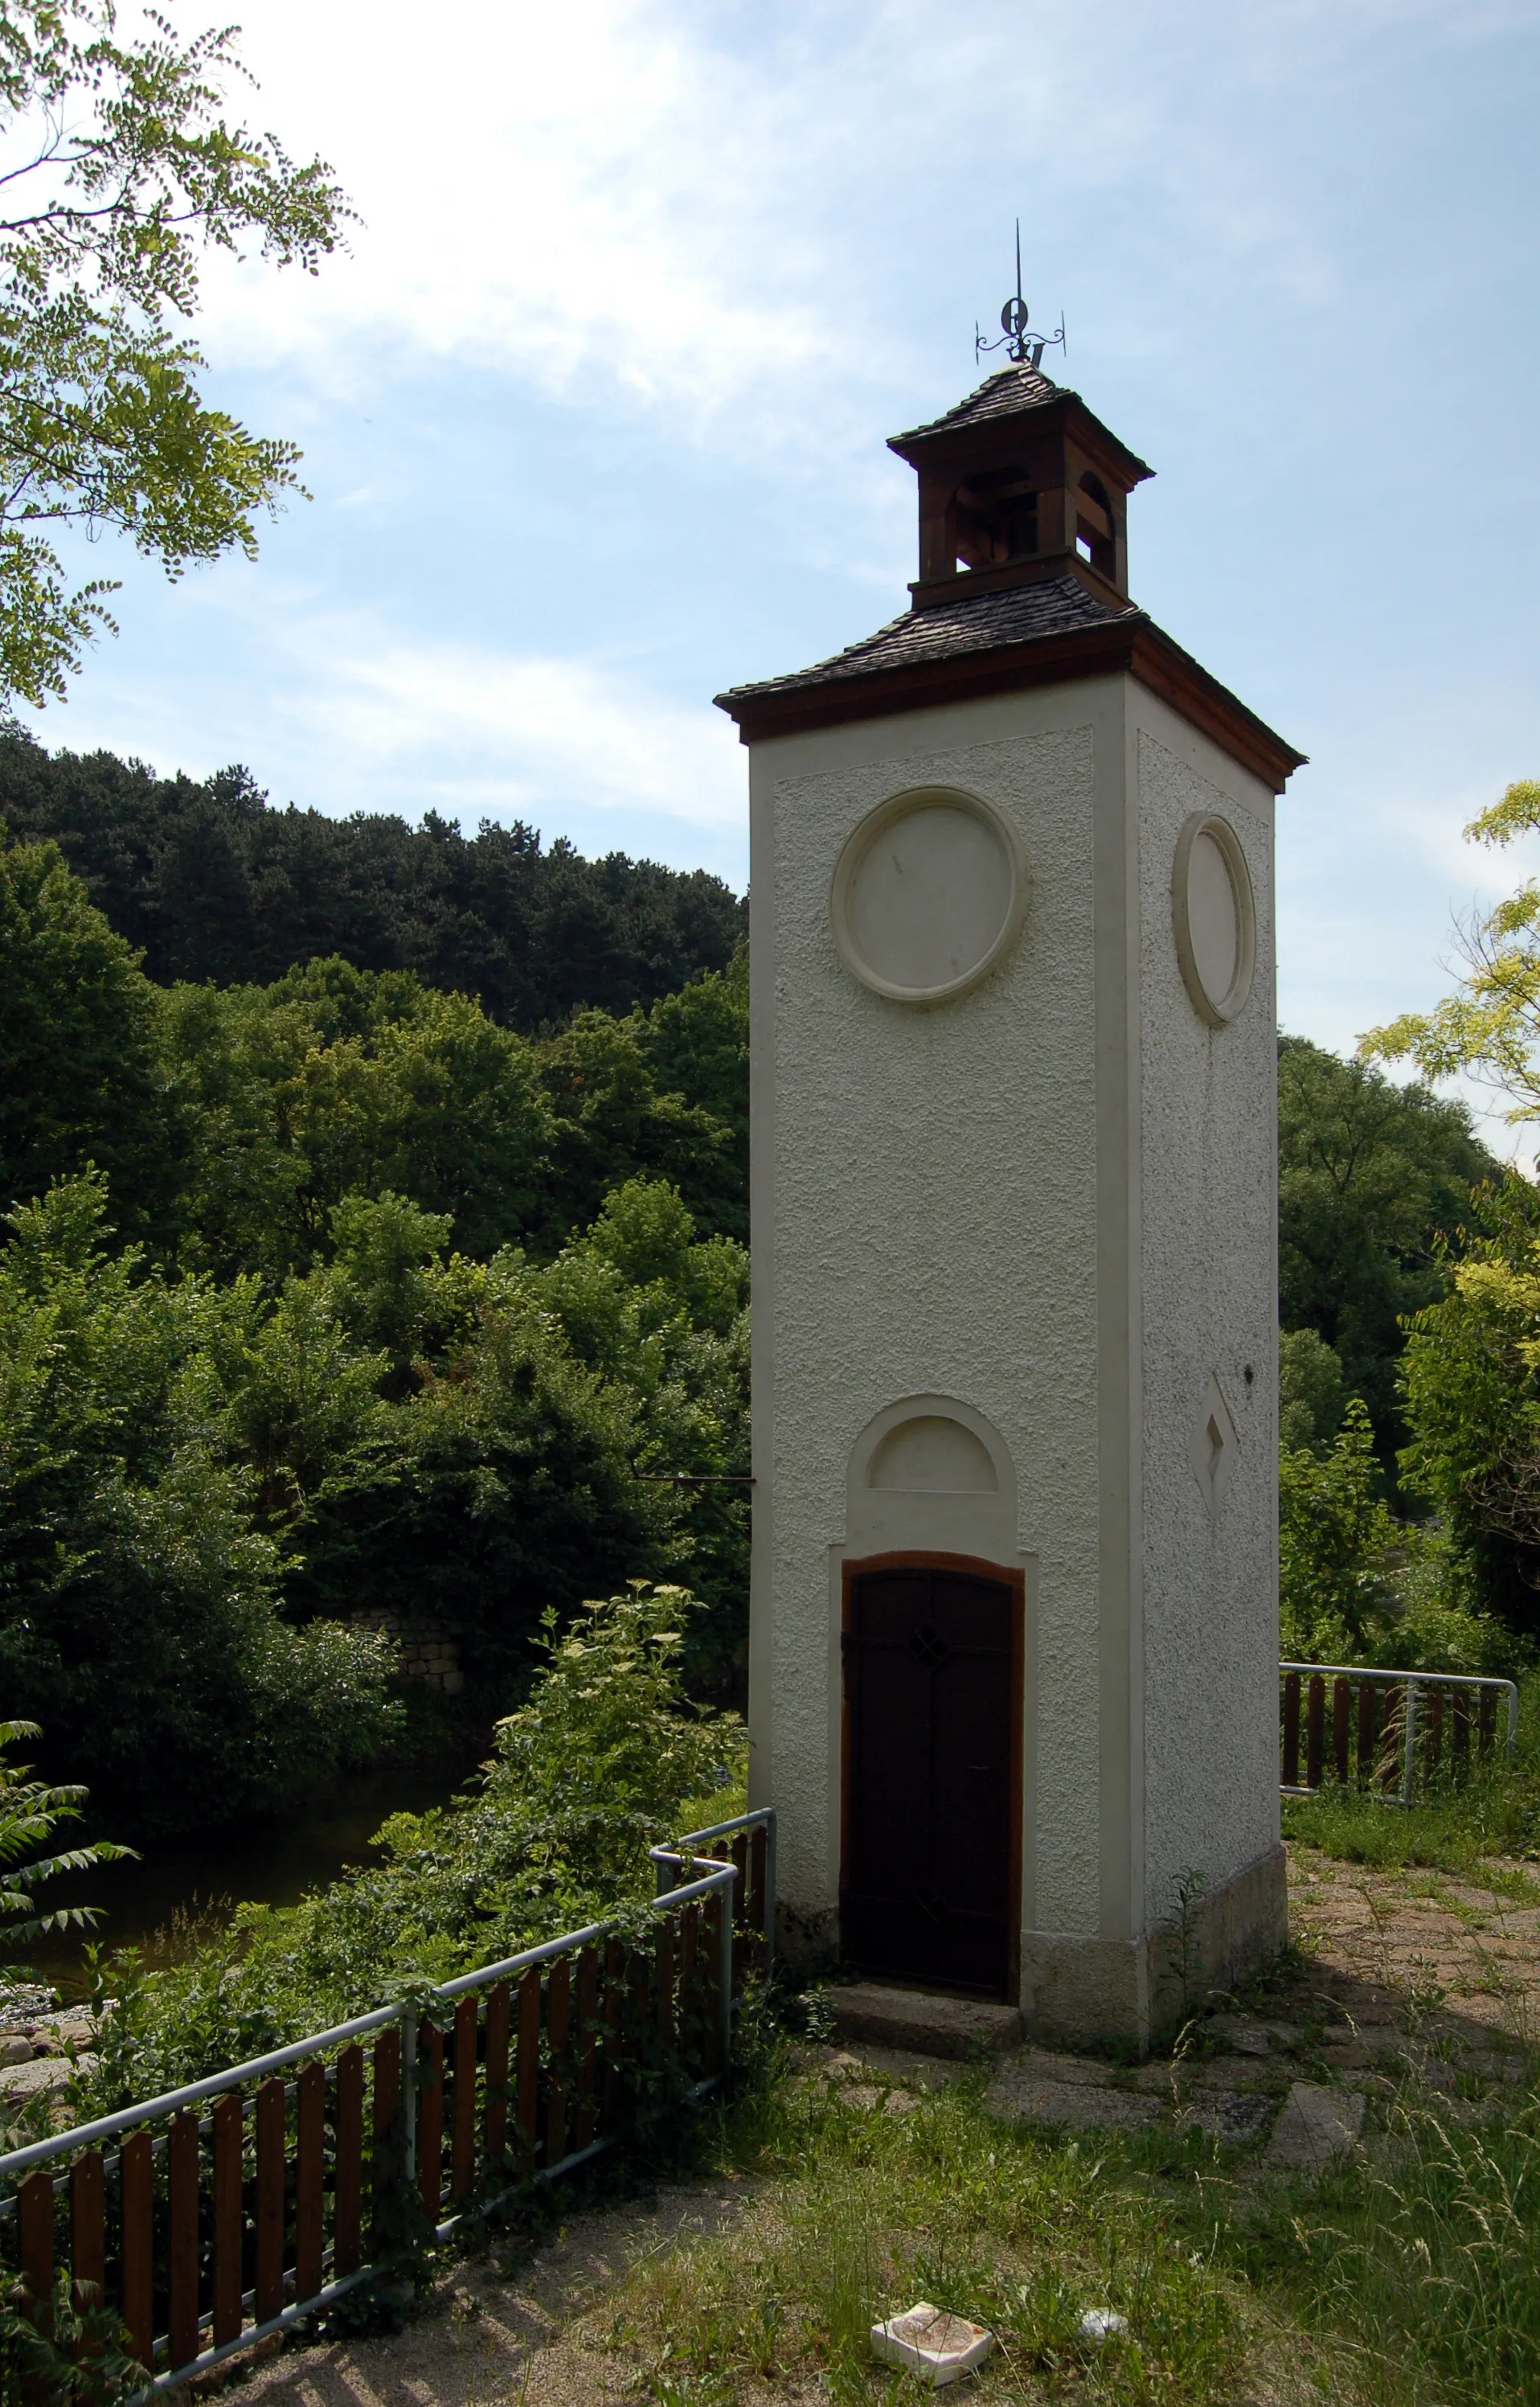 Photo showing: Flood warning tower in St. Veit an der Triesting, built at about 1829, was used as a warning system for the canal leaving river Triesting here. When a flood was coming down the river, the rising water causes a bell in the roof of the tower to ring. Then the weir was opened and the industrial areal of Neufeldt was not flooded.
The tower was renovated in 2004 and is a cultural heritage monument now.